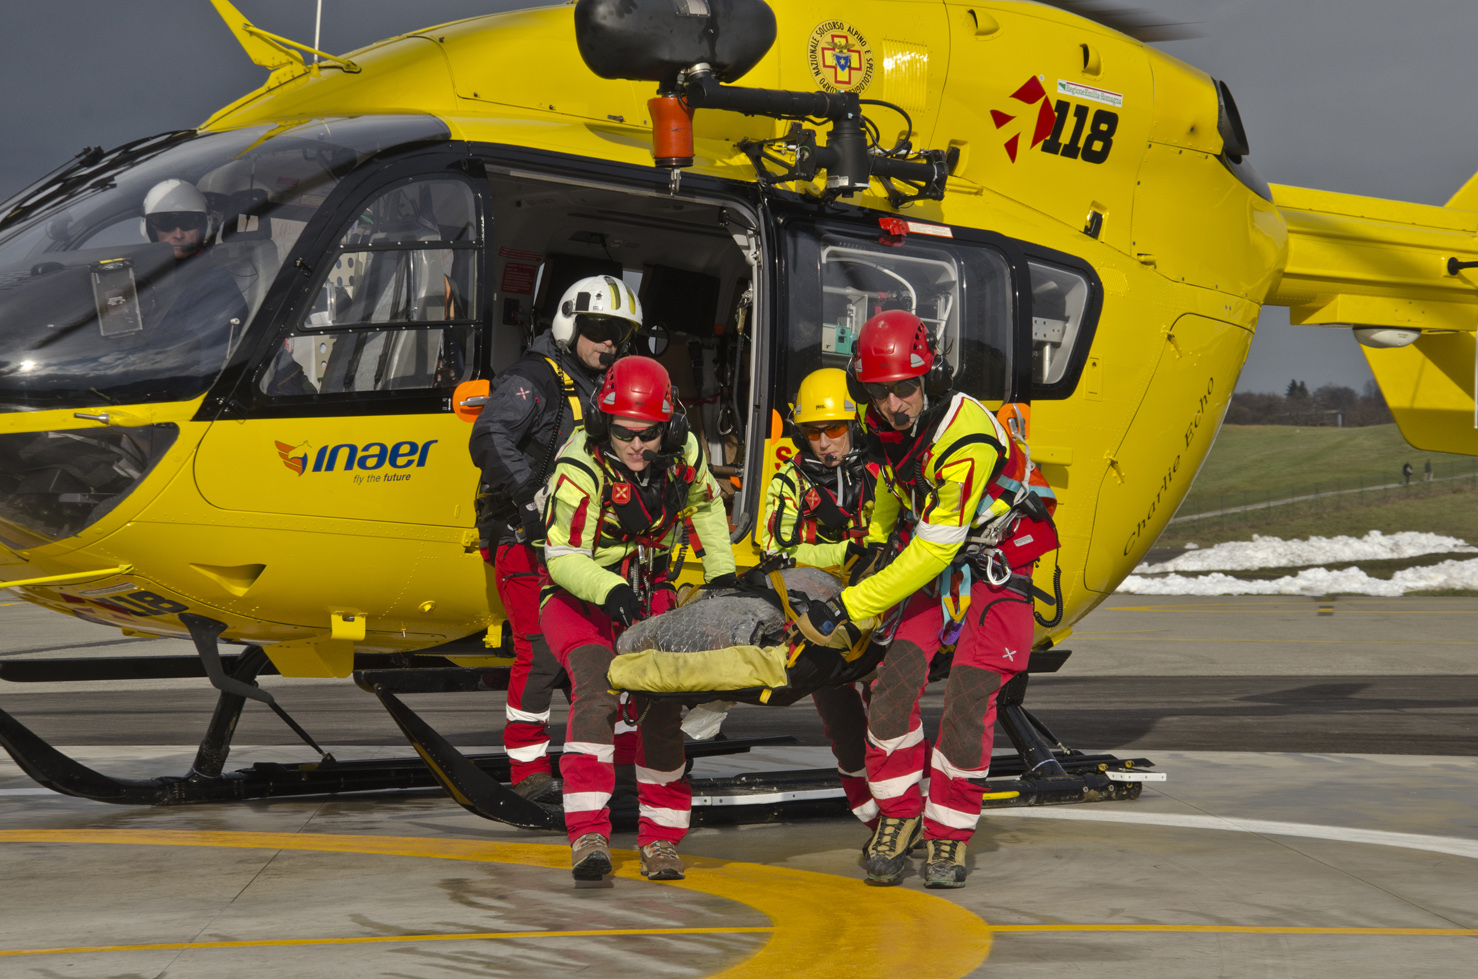 Airbus EC145 Helicopter - Helicopter Rescue 118 Pavullo...